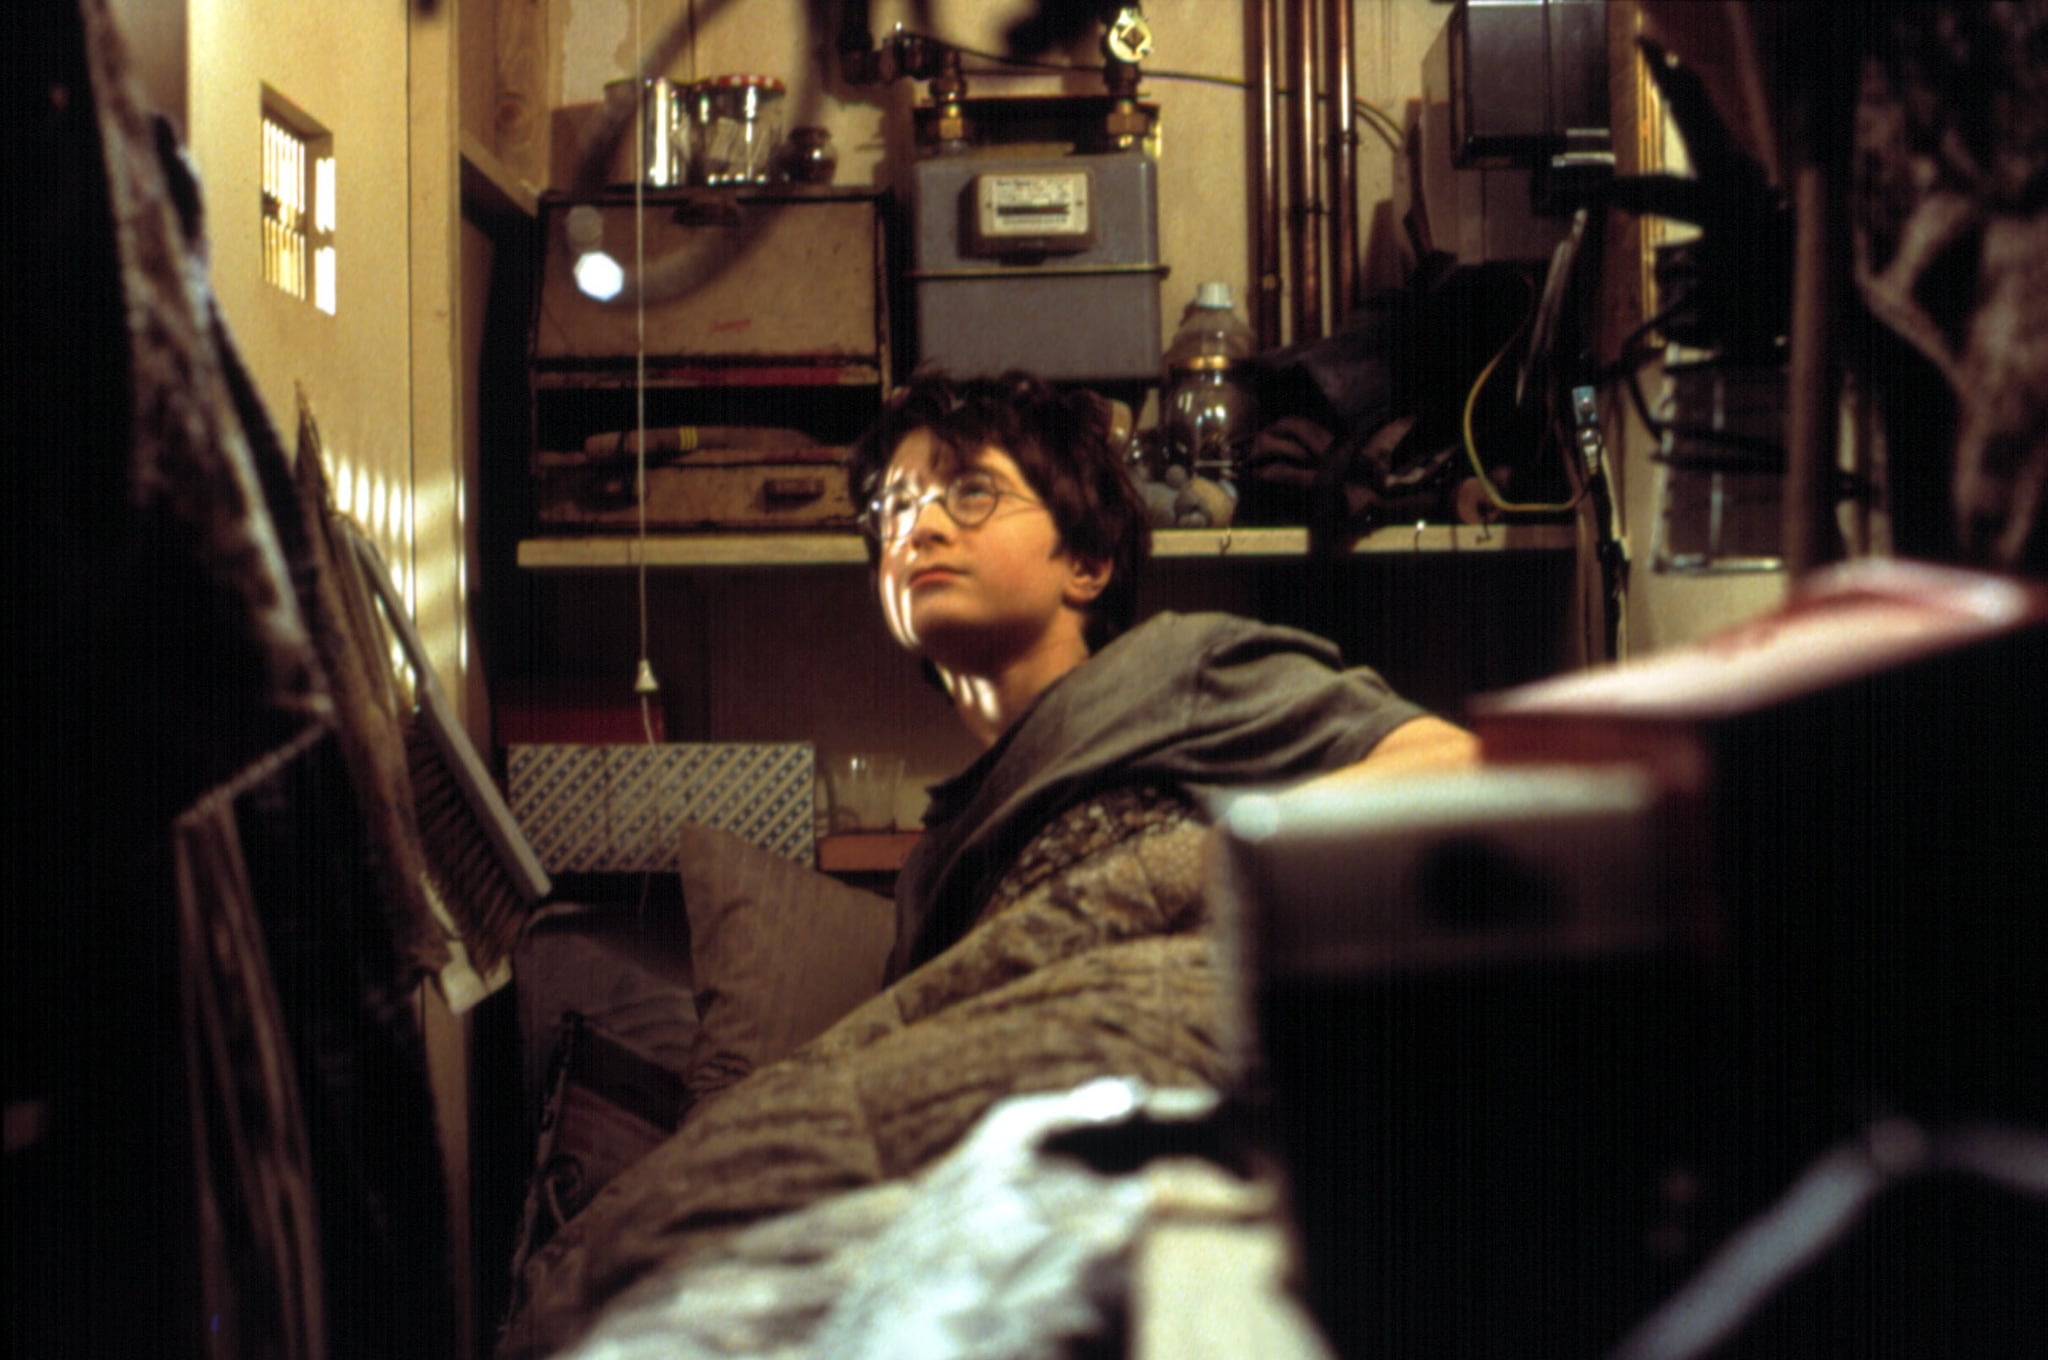 Harry Potter's bedroom in the cupboard under the stairs in 4 Private Drive.